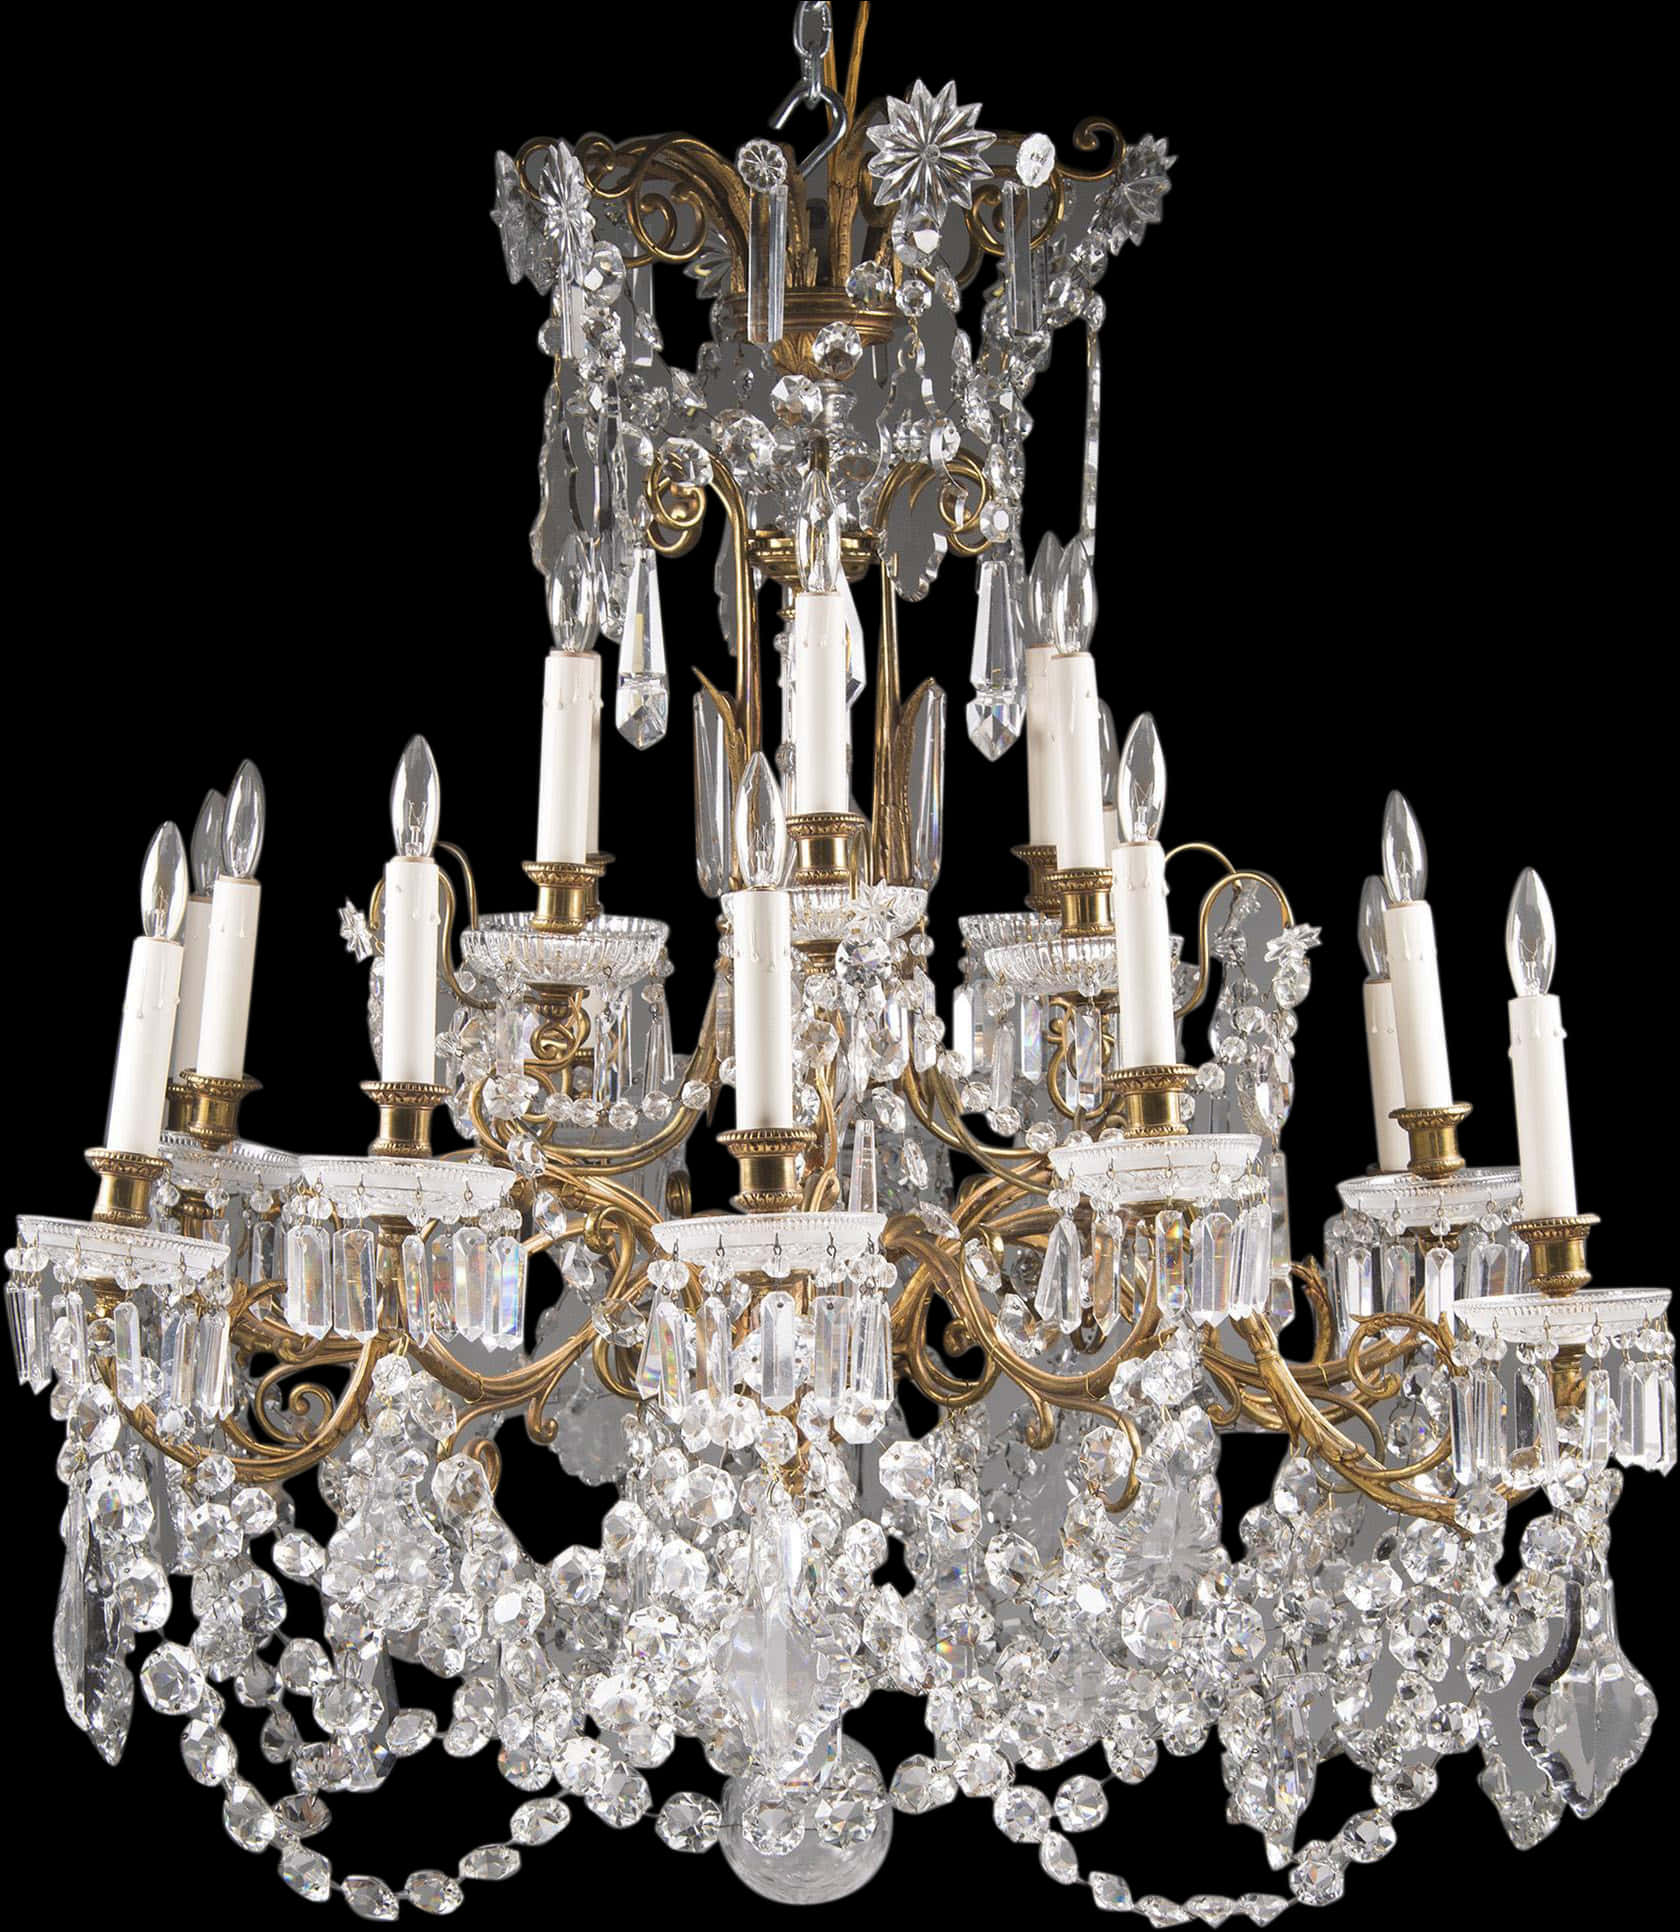 A Chandelier With Candles